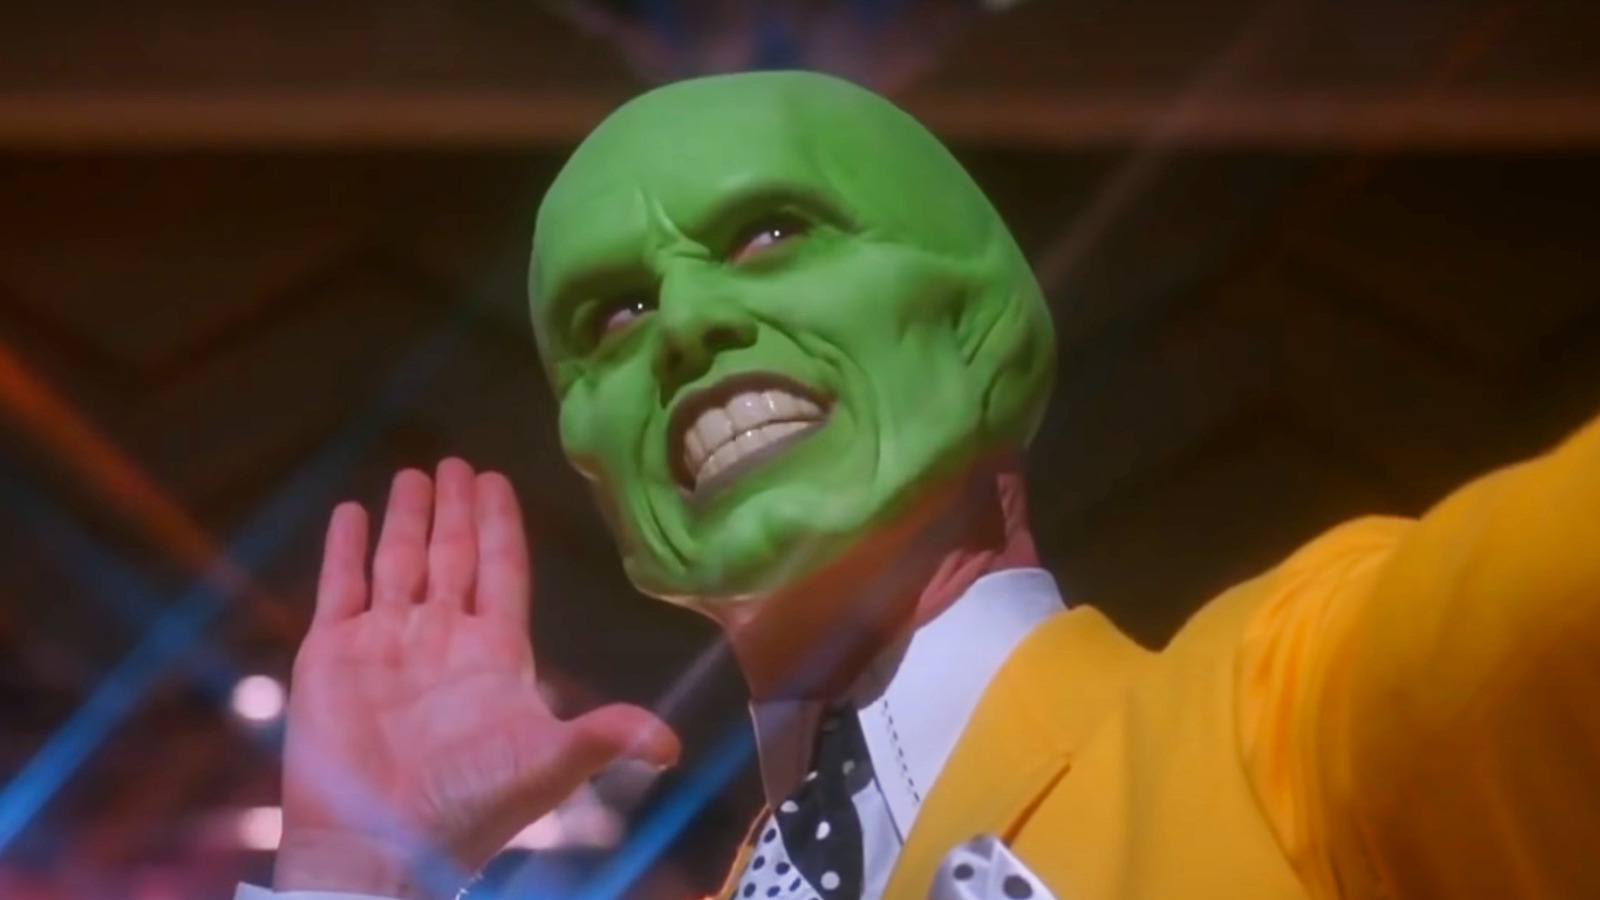 How The Mask Managed To Transform Jim Carrey Without Hiding His ...